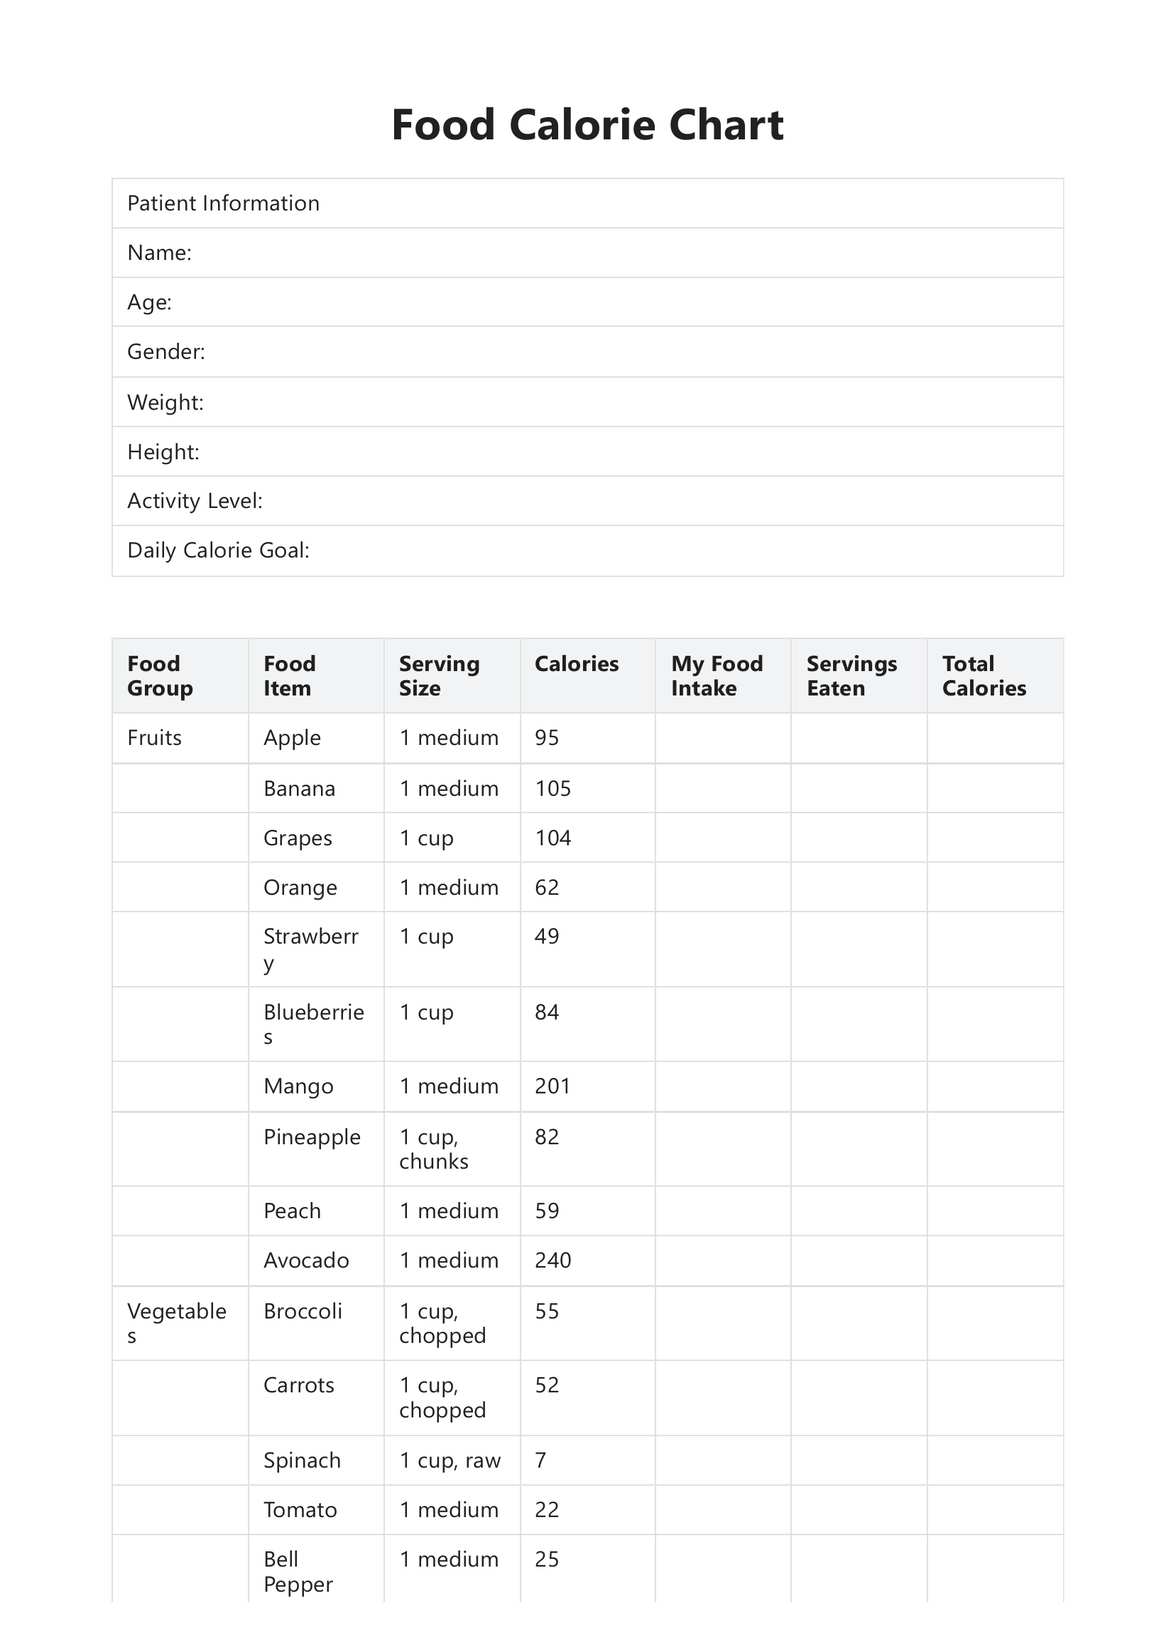 Food Calorie Charts PDF Example